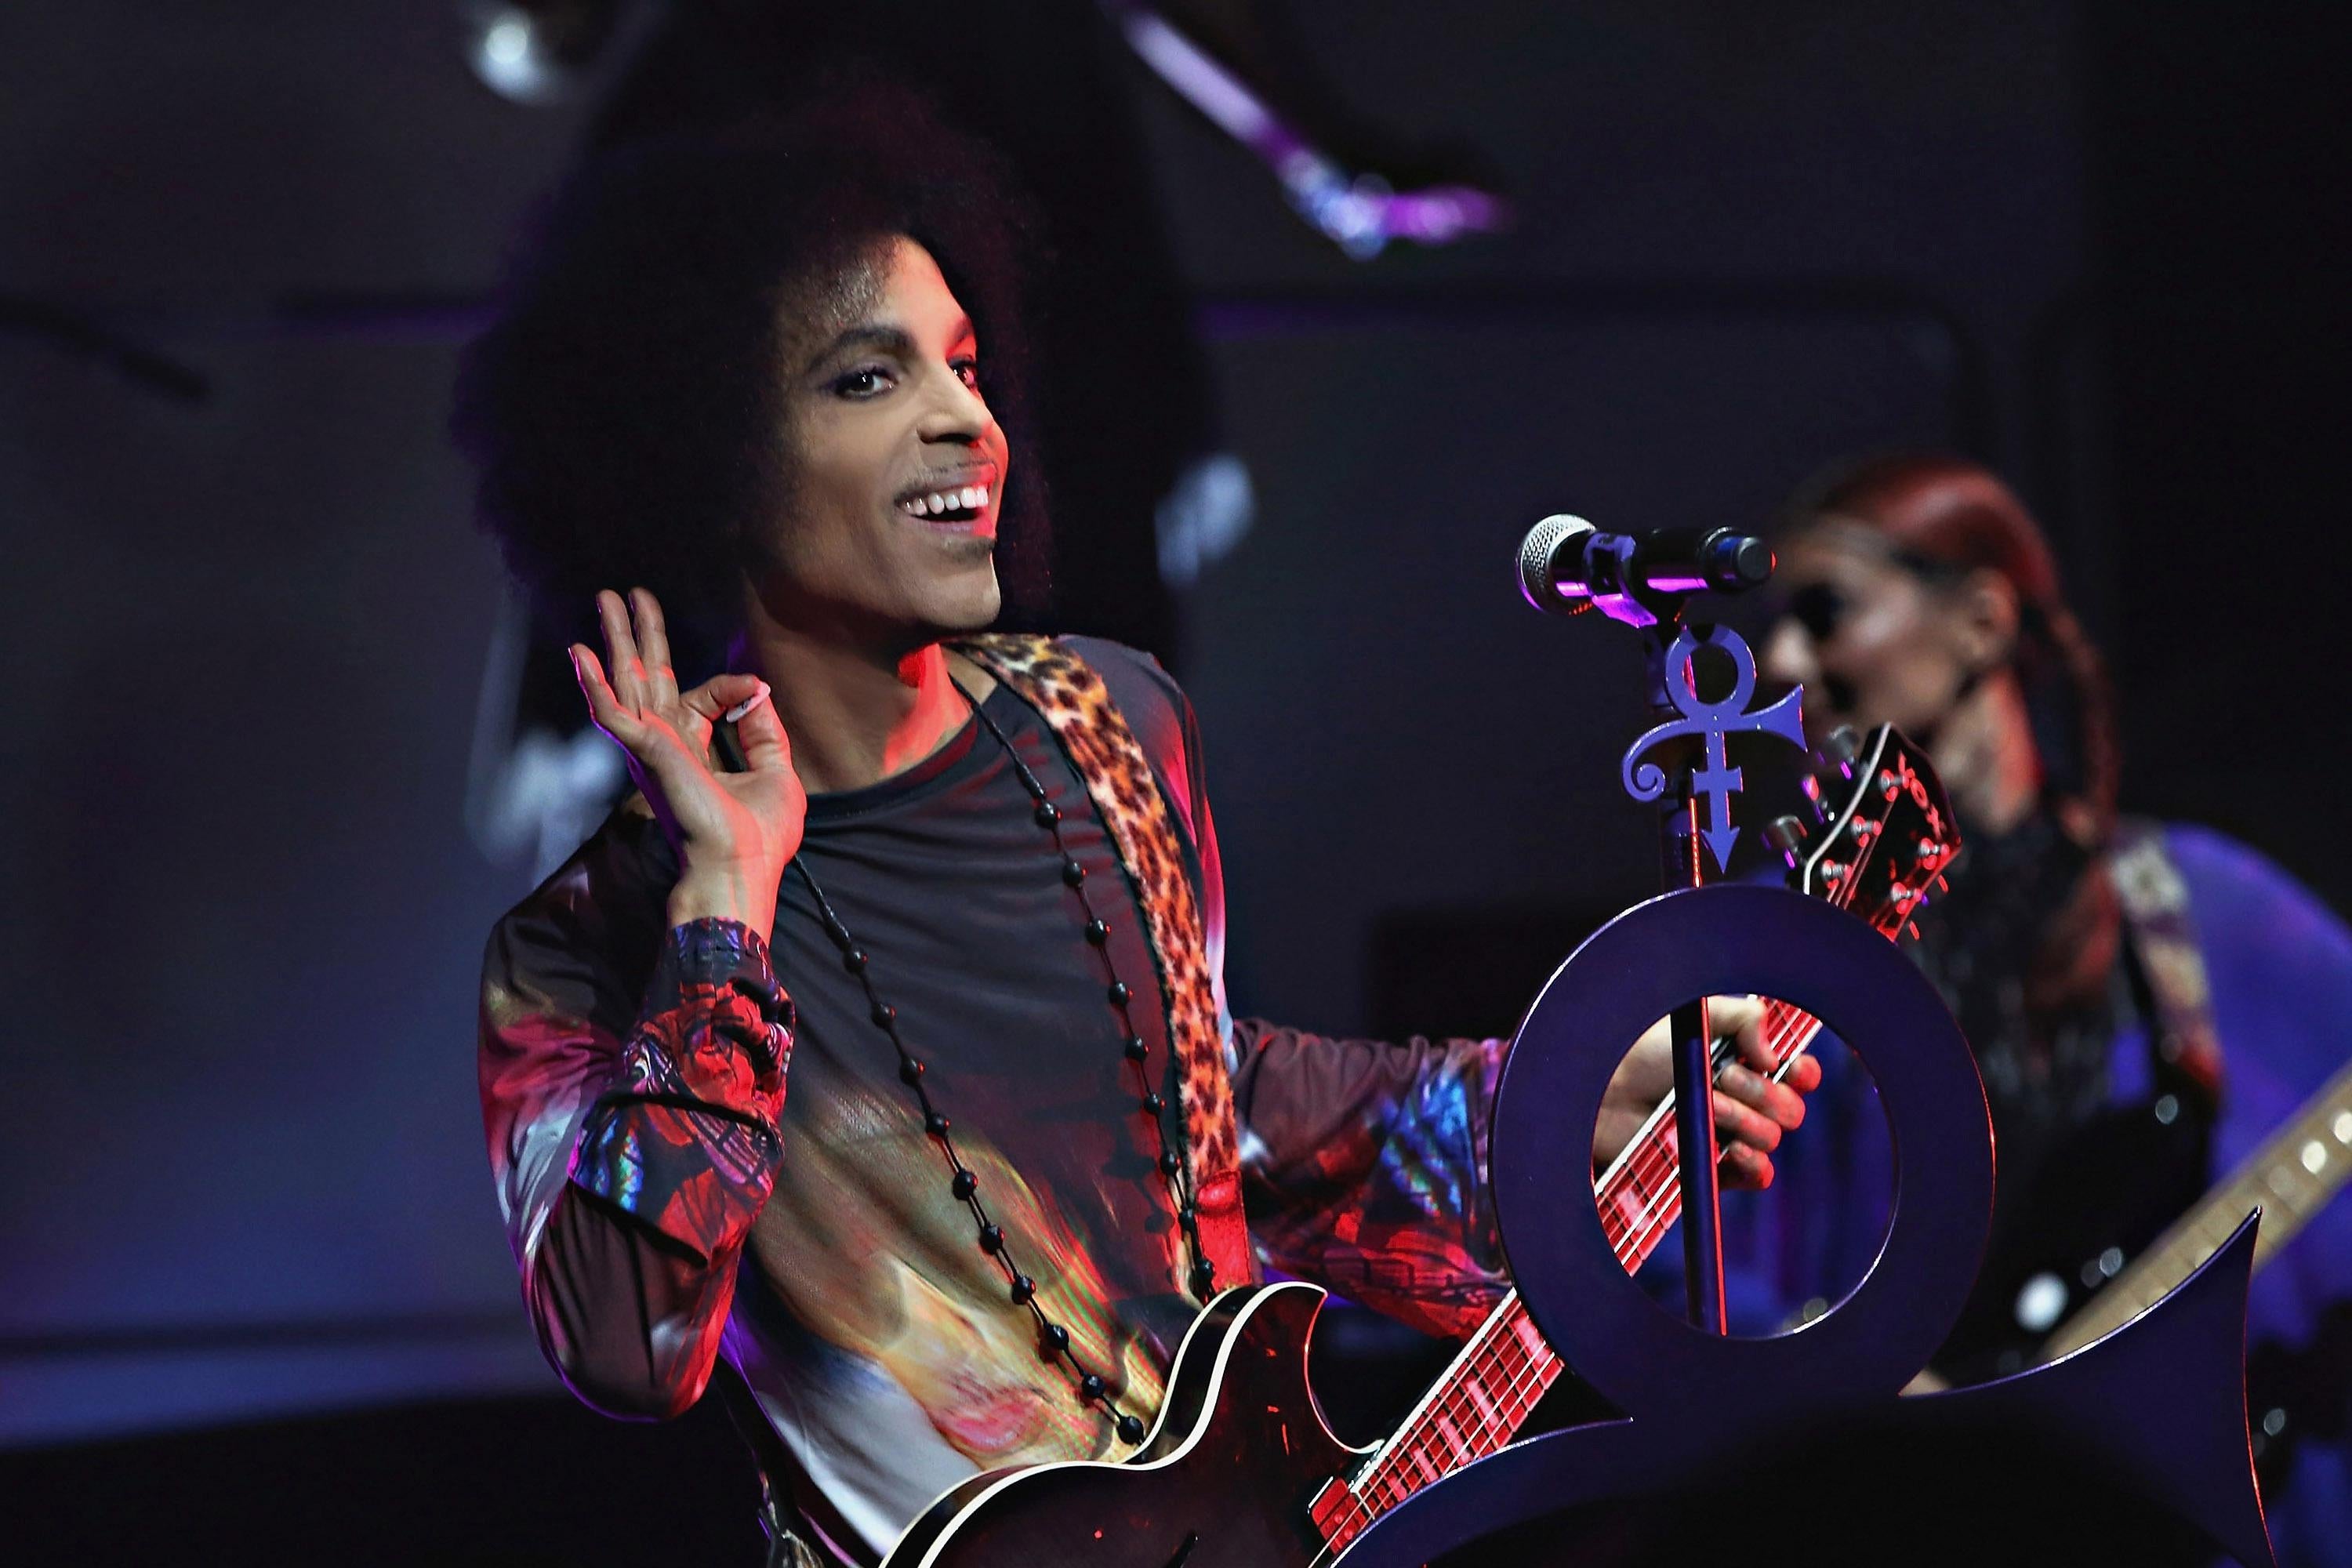 A man with a large afro and wearing a multi-colored suit holds a guitar on a stage. He leans to the right side of the microphone with his hand by his ear, smiling. 